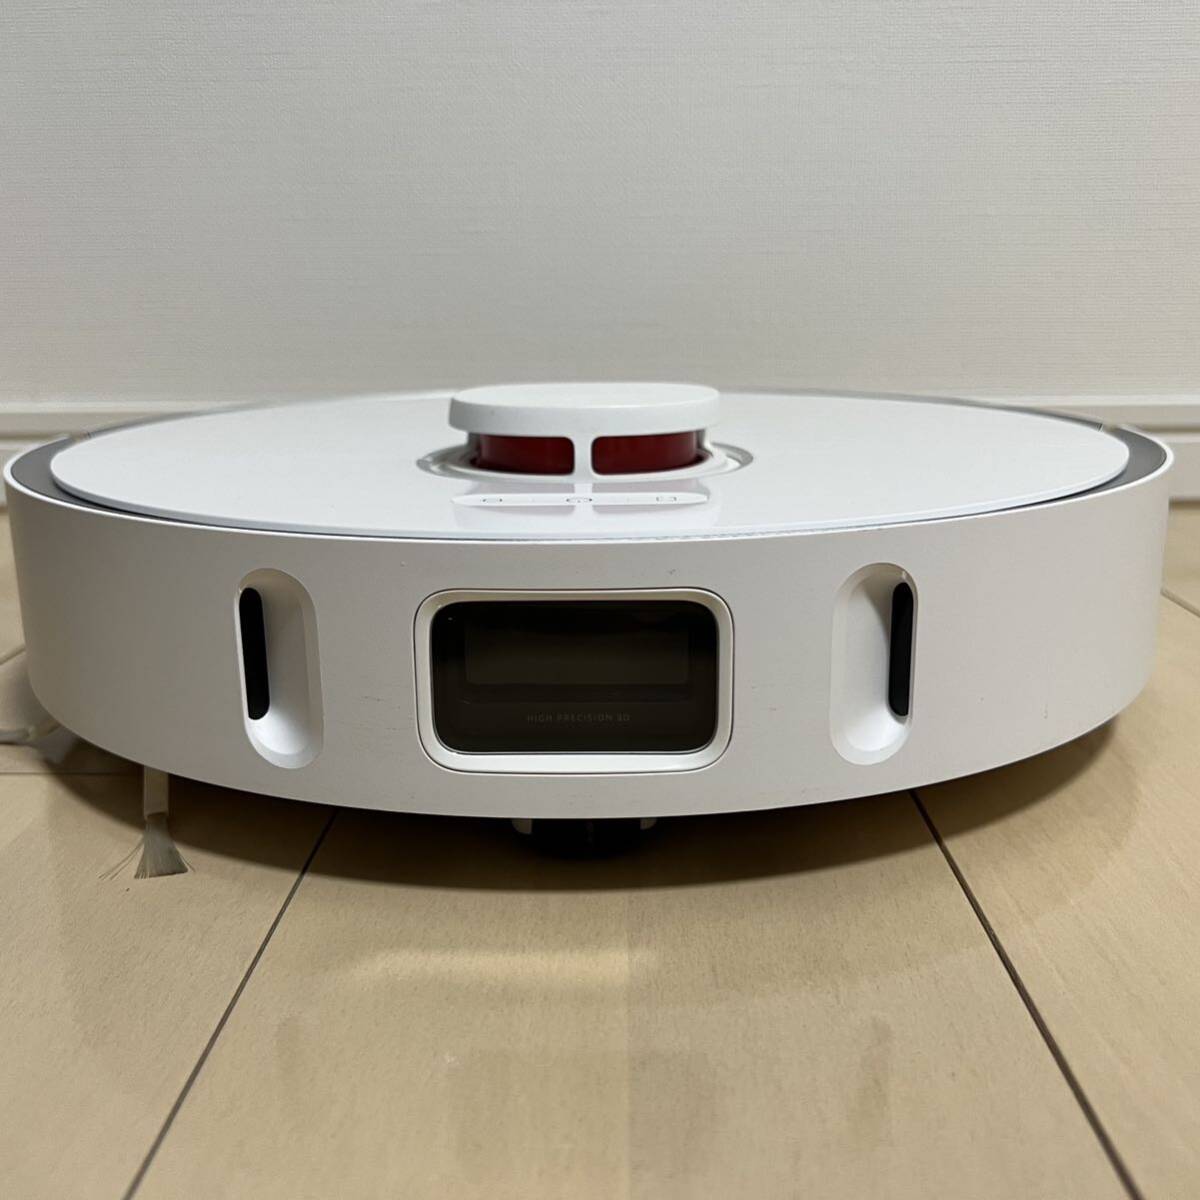 ***[ junk ]Dreame L10 Pro robot vacuum cleaner 3D high precision obstacle thing detection water ..Alexa correspondence ***